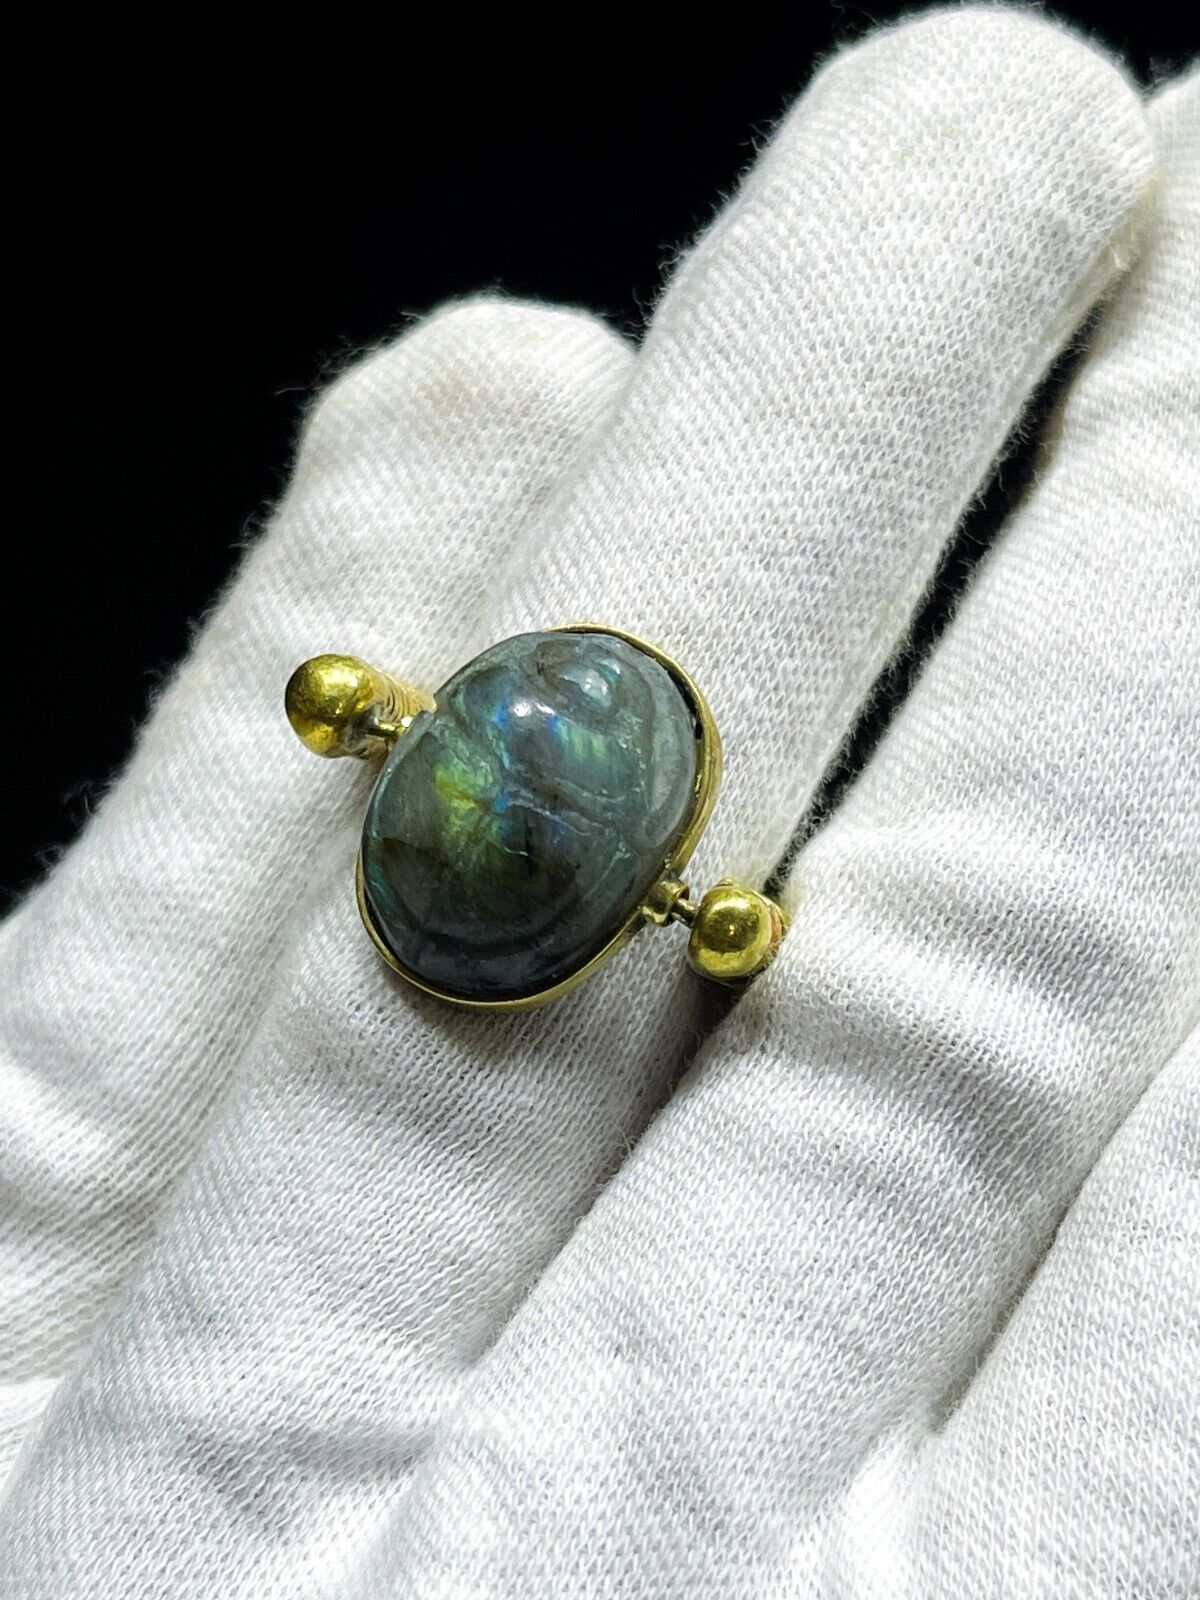 Egyptian Ring of Egyptian Scarab from labradorite stone ( symbol of good luck )